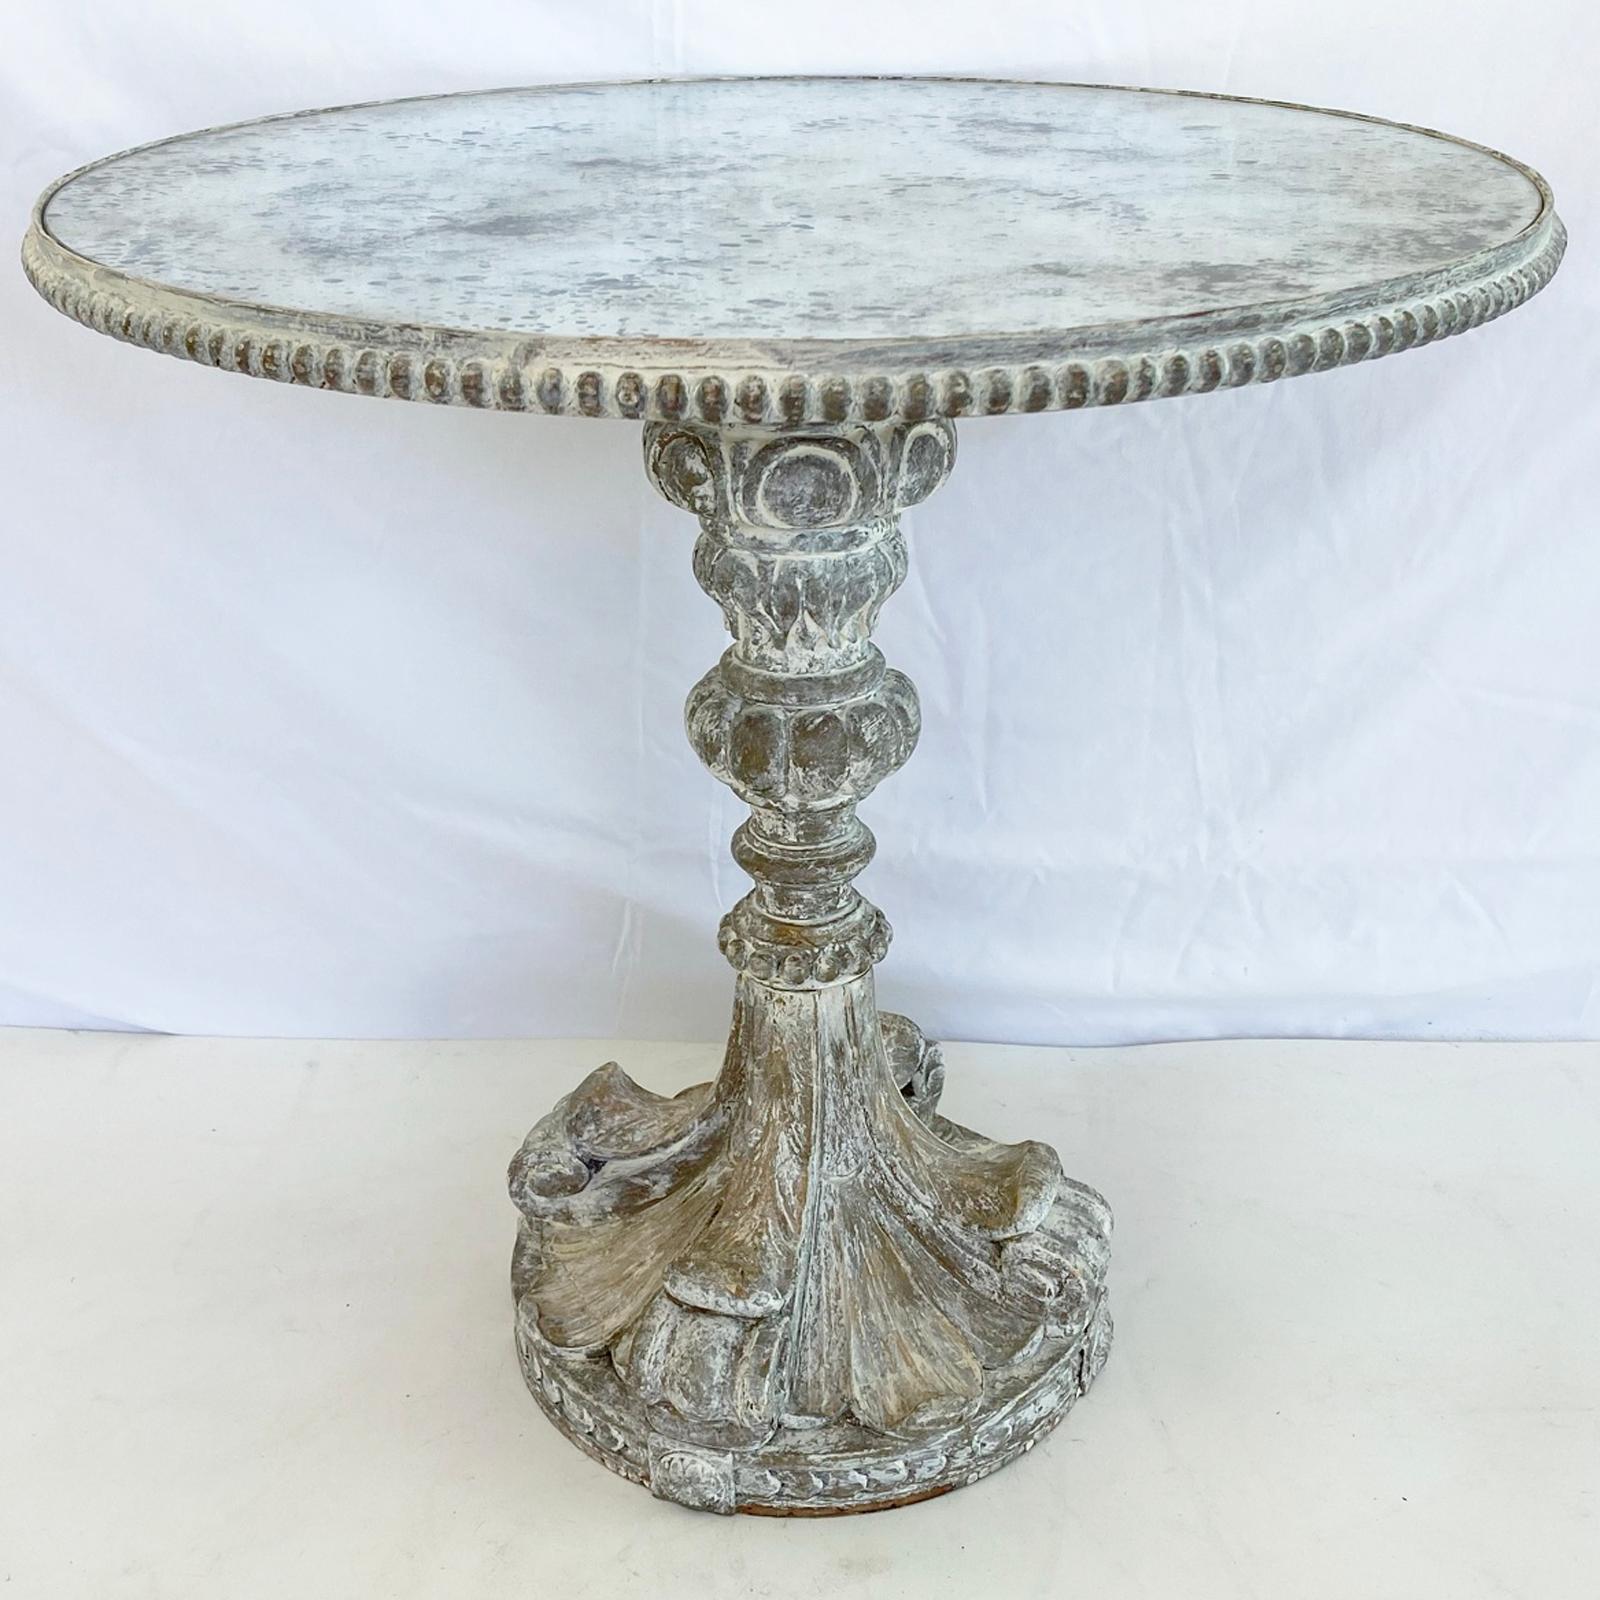 Occasional table, having a round top of antiqued mirrorplate, inset on painted table base, having a reeded border, raised on a knopped, pedestal base, carved with scrolls, beading, and acanthus details, ending in a round foot. 

Stock ID: D3952.